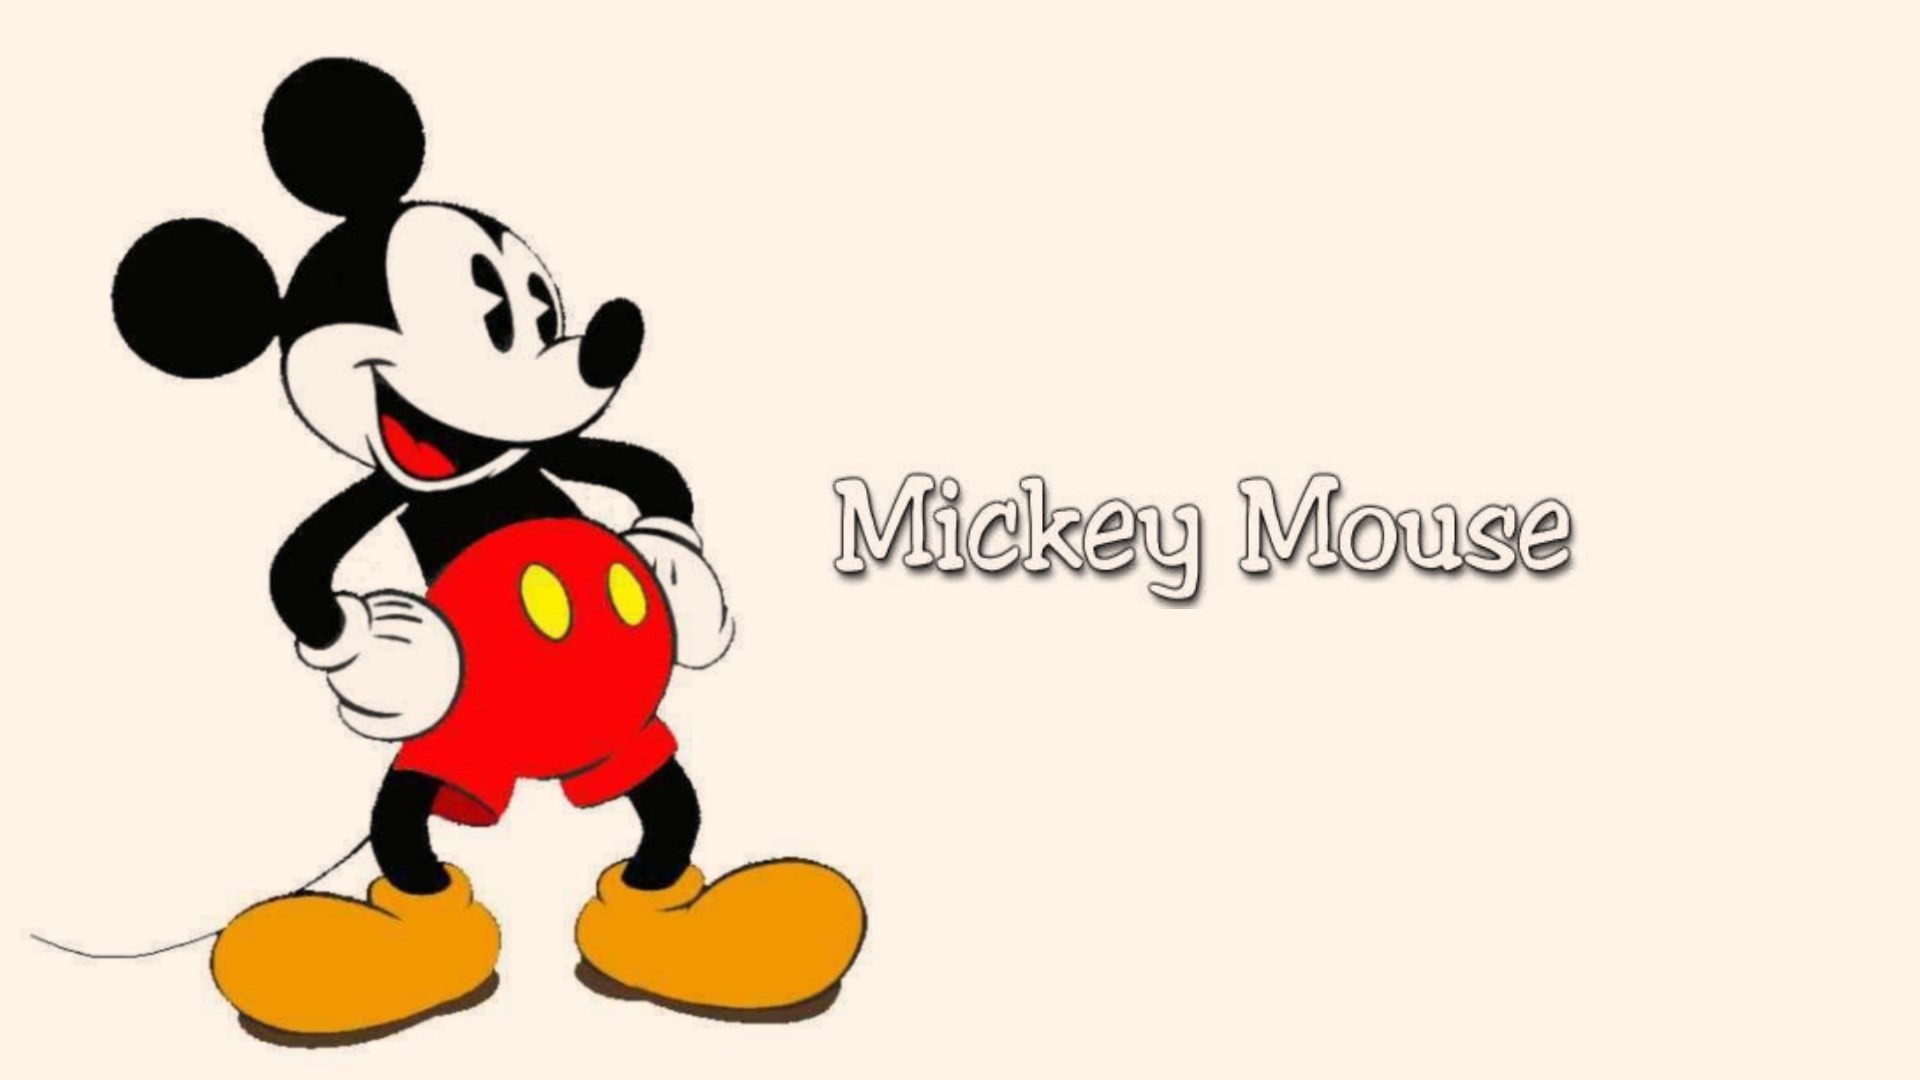 Free Download Cute Mickey Mouse Wallpaper Airwallpapercom 19x1080 For Your Desktop Mobile Tablet Explore 24 Mickey Mouse Pc Wallpapers Mickey Mouse Background Mickey Mouse Wallpaper Mickey Mouse Backgrounds